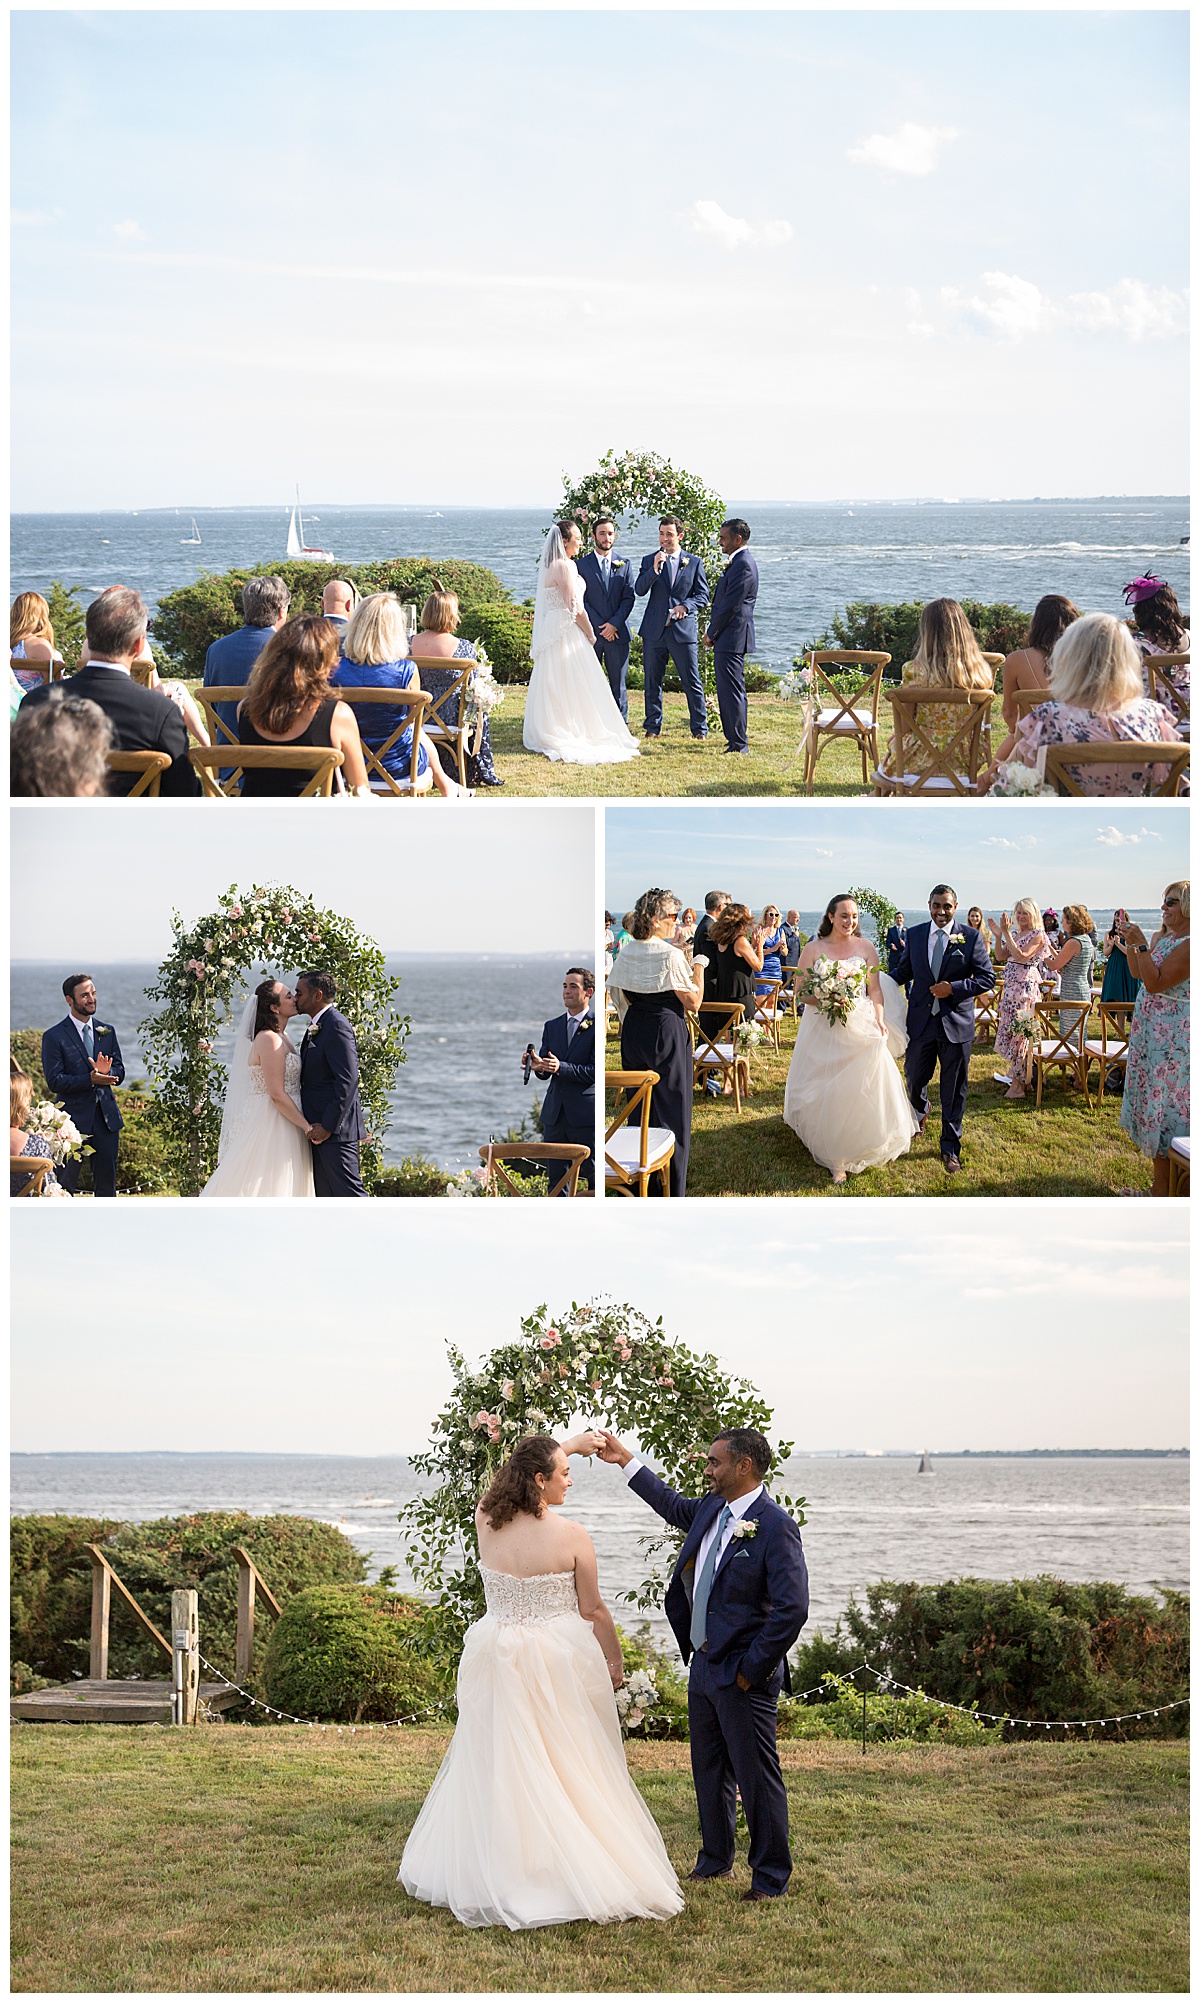 The bride and groom celebrate their love at their waterfront wedding ceremony in Warwick RI. 